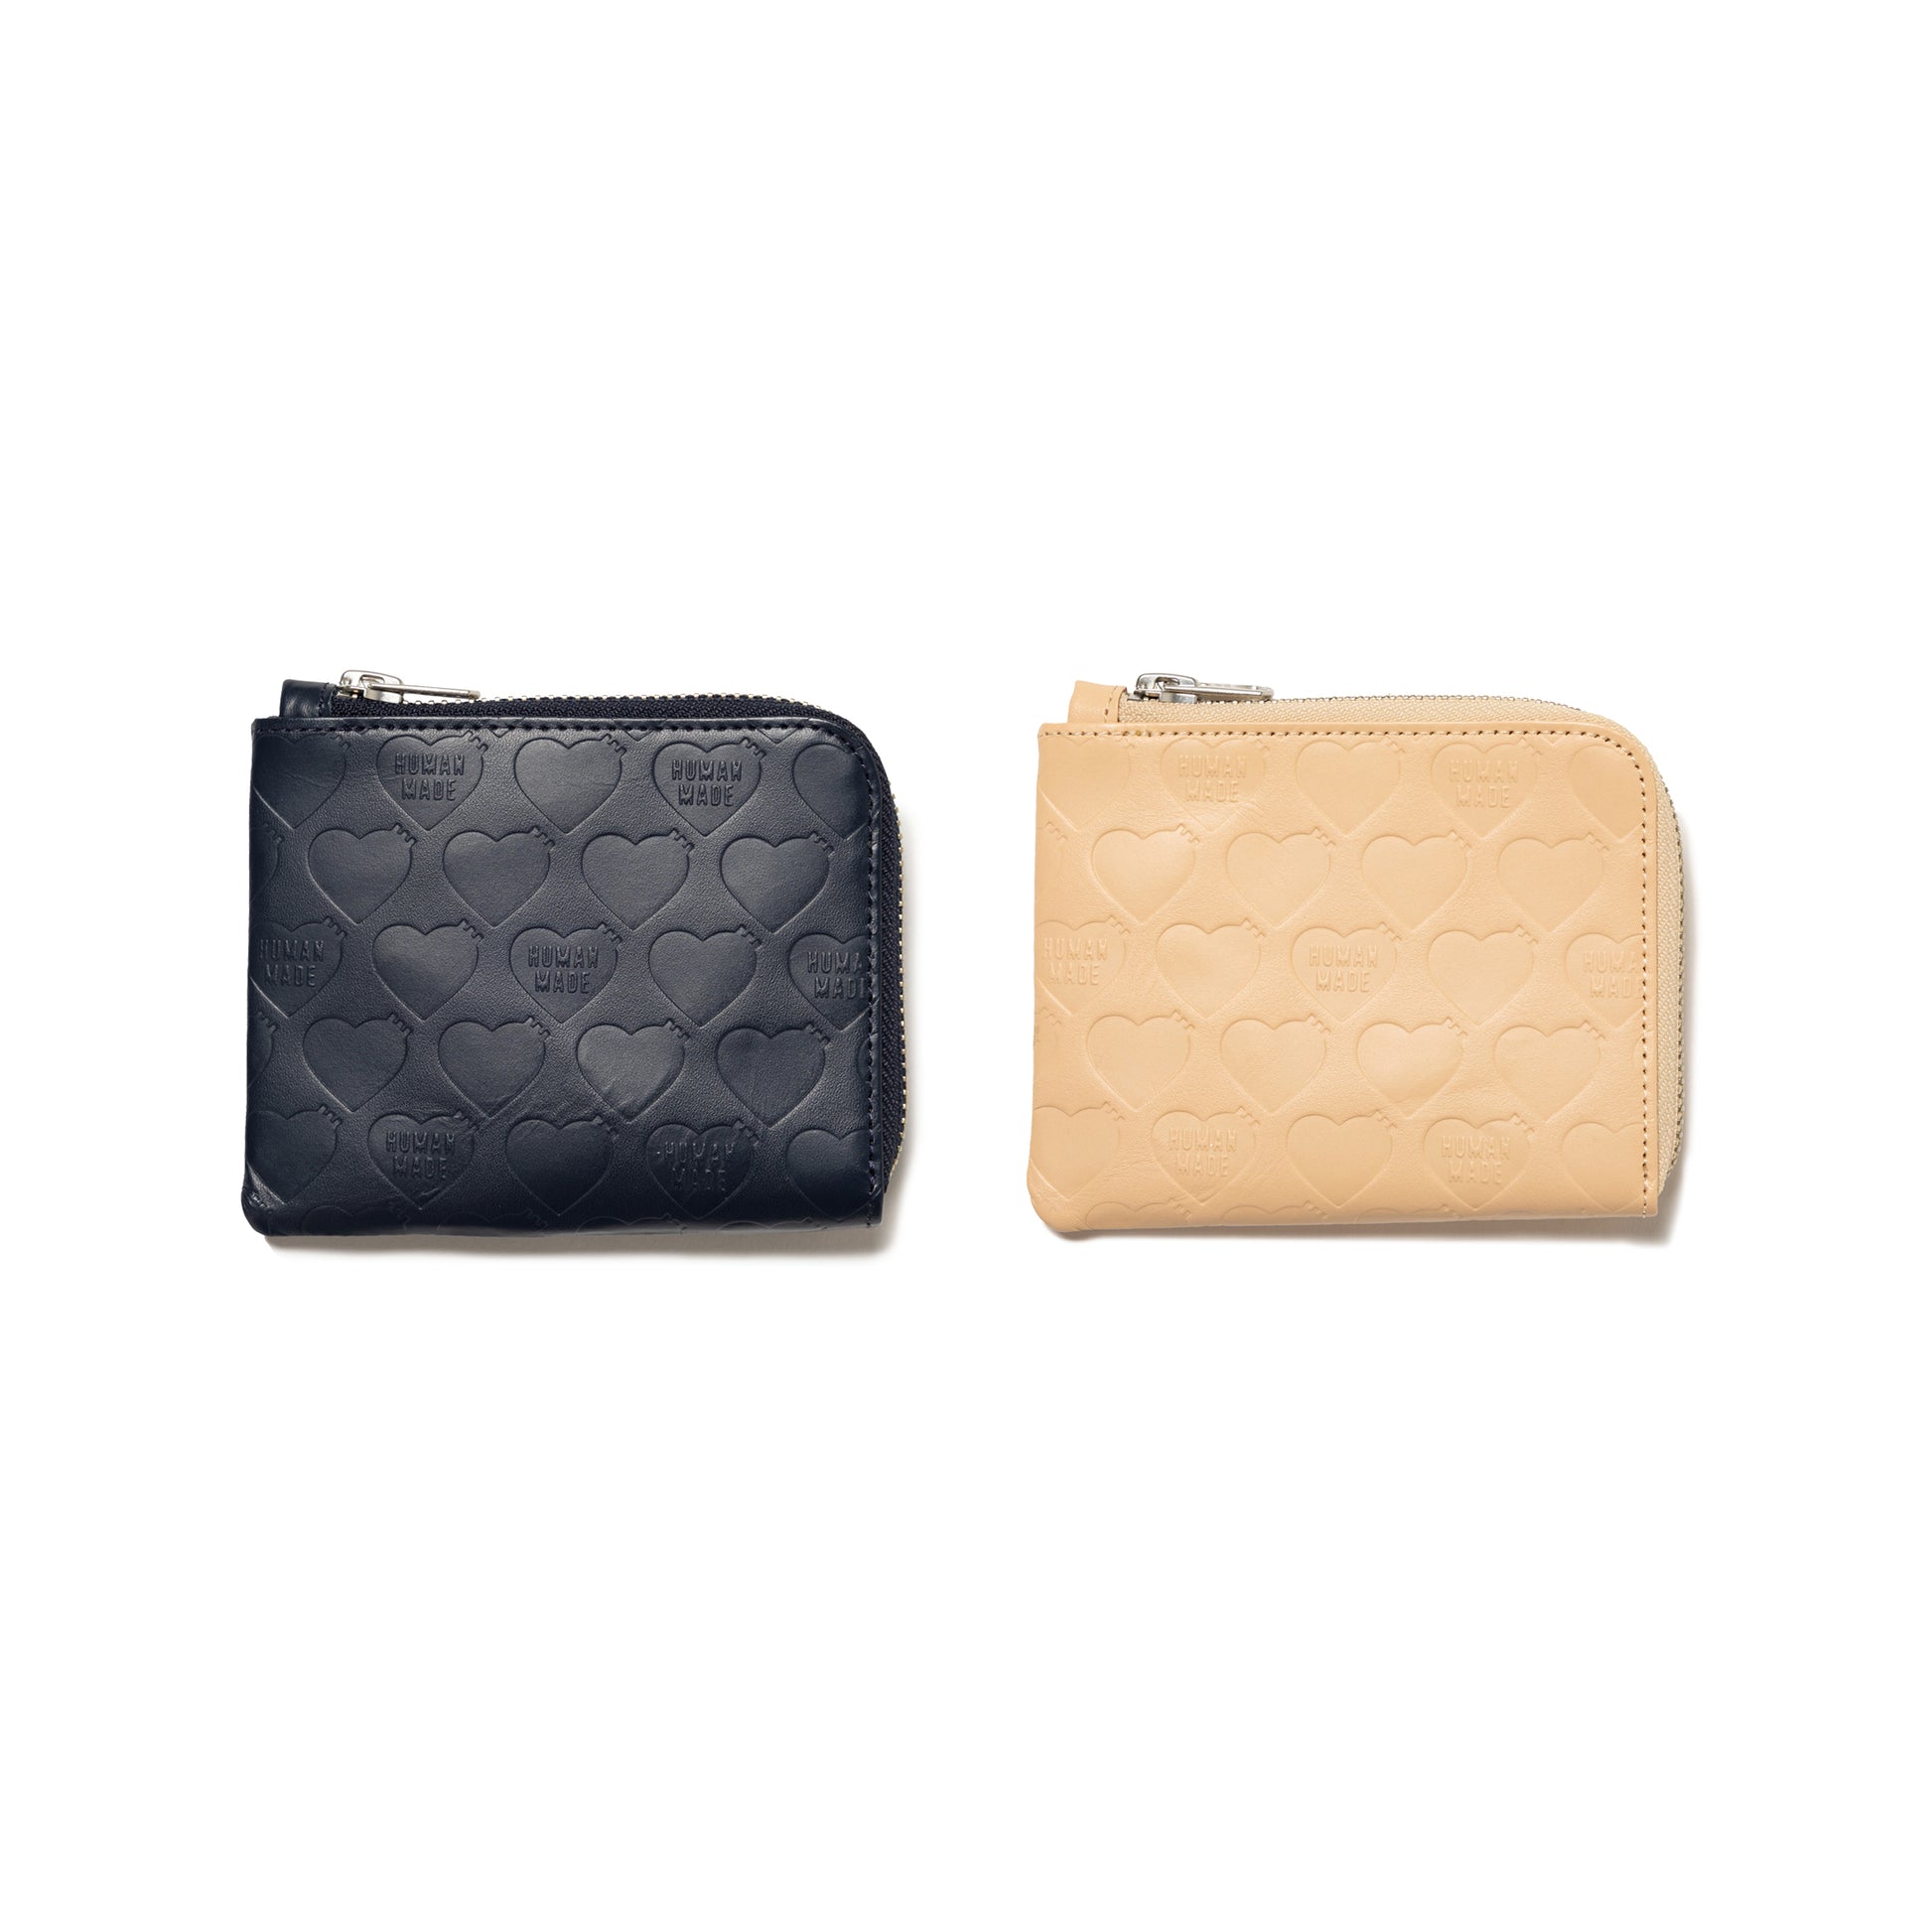 LEATHER ZIP WALLET – HUMAN MADE ONLINE STORE